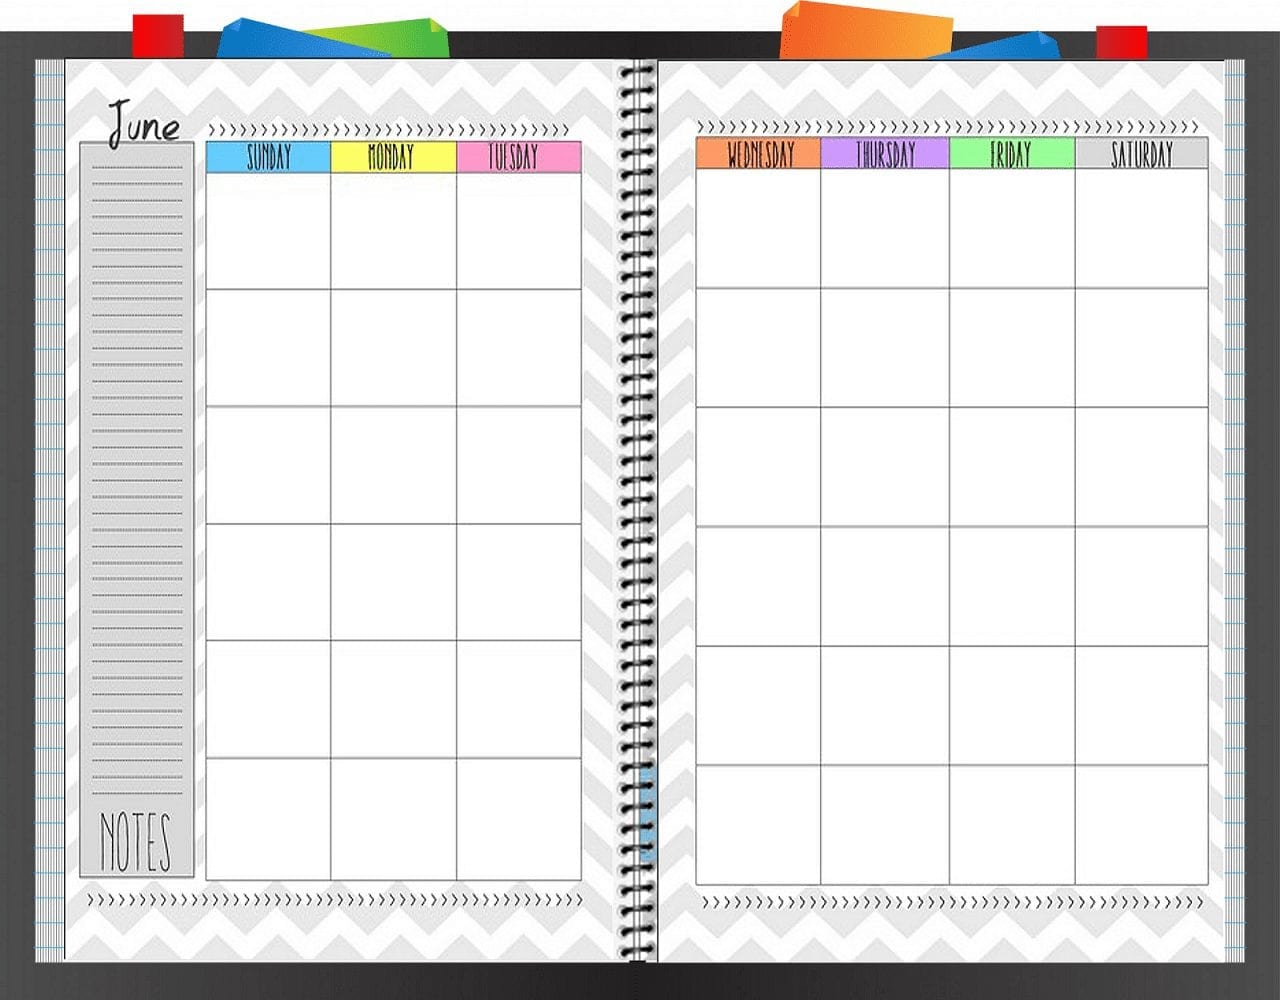 monthly budget planner template 1 1